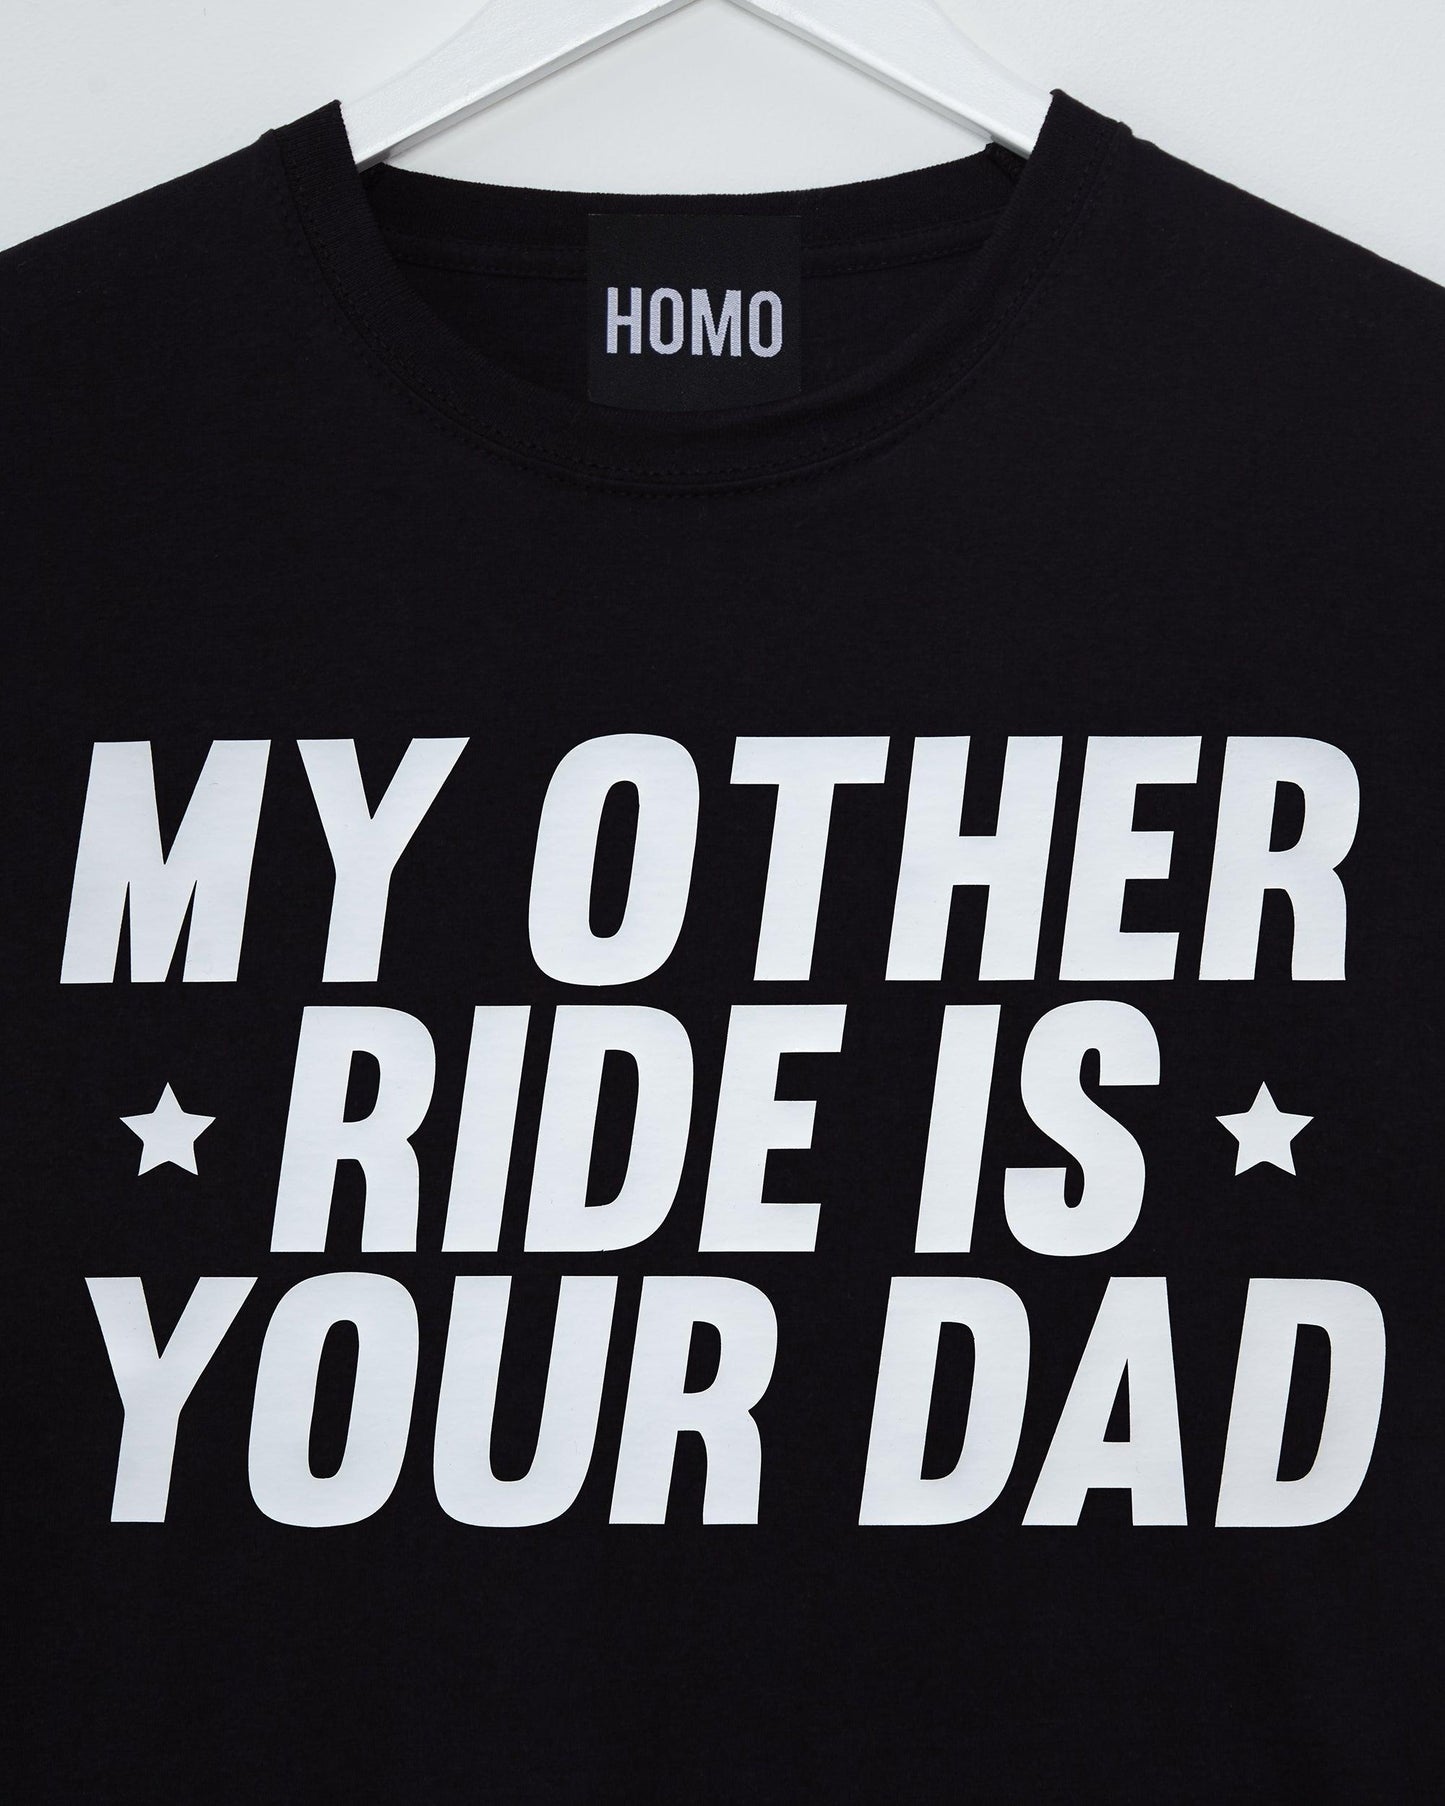 My other ride is your dad, glossy white on black - tee - HOMOLONDON